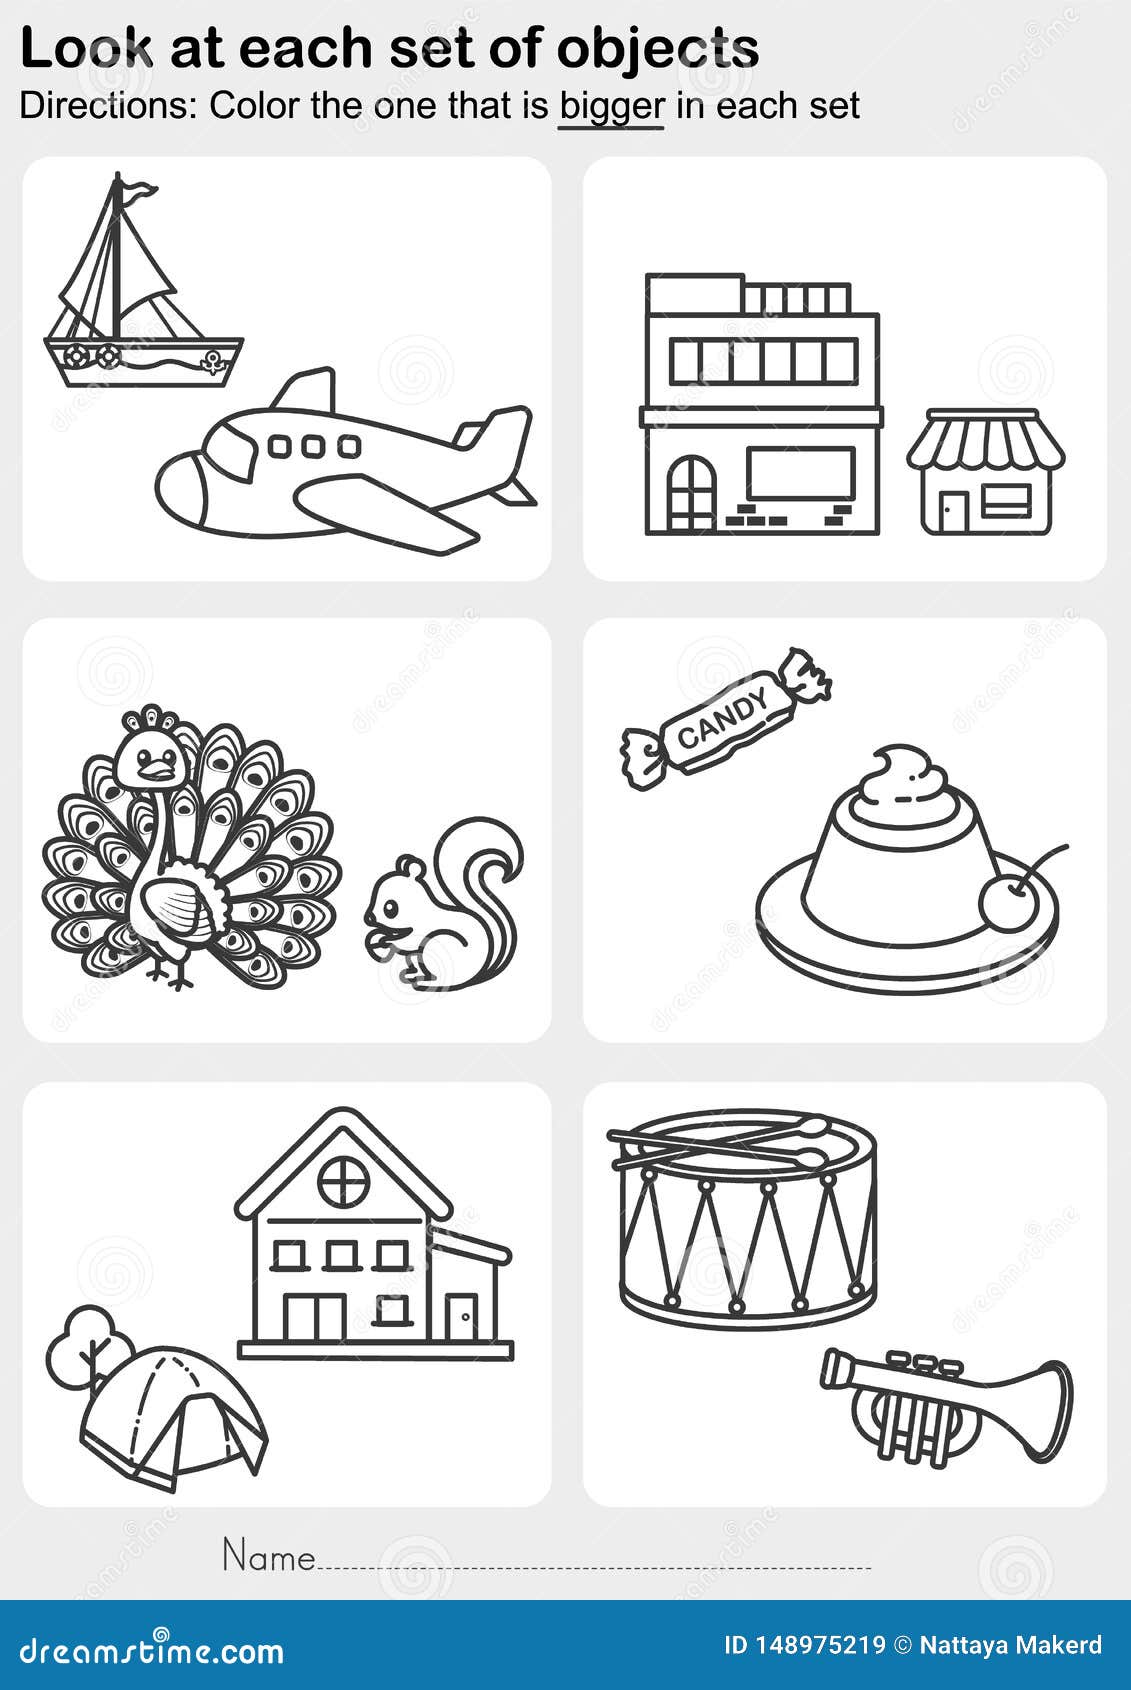 look at each set of objects - color the one that is bigger in each set